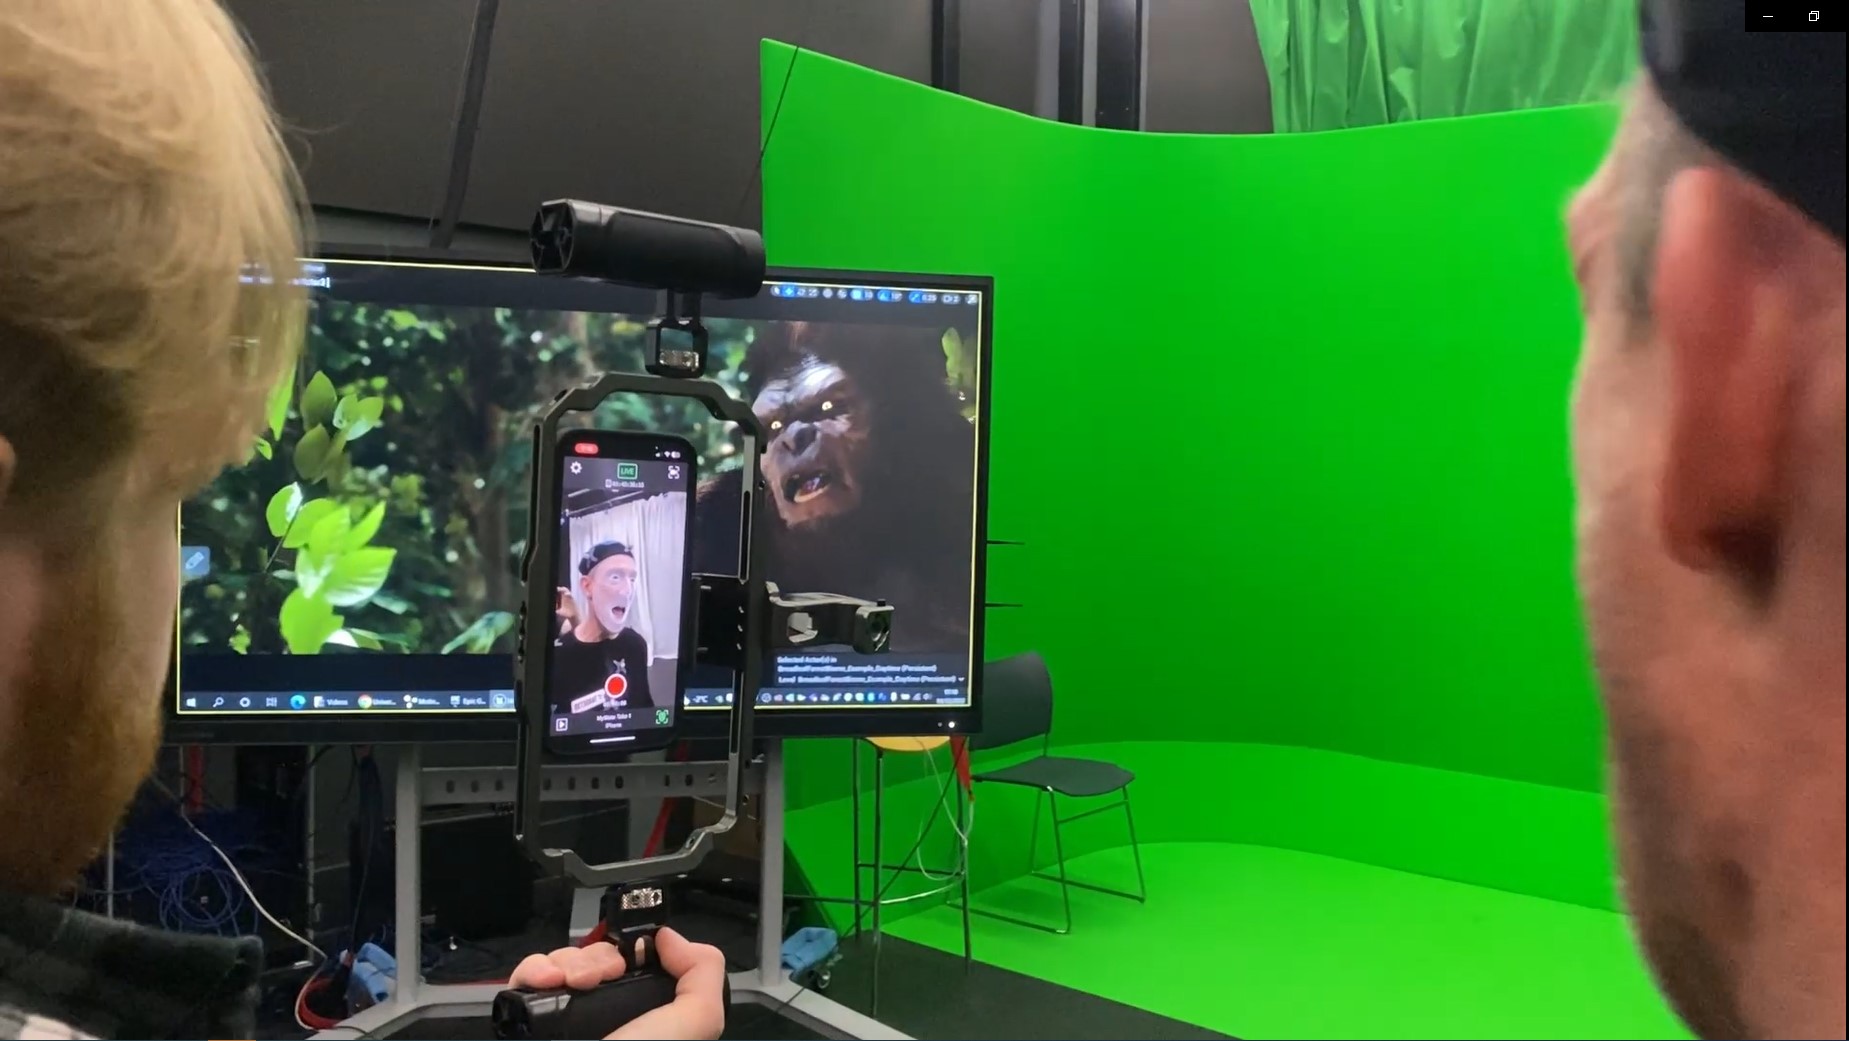 Screenshot taken from sizzle reel shows mocap performer next to green screen 